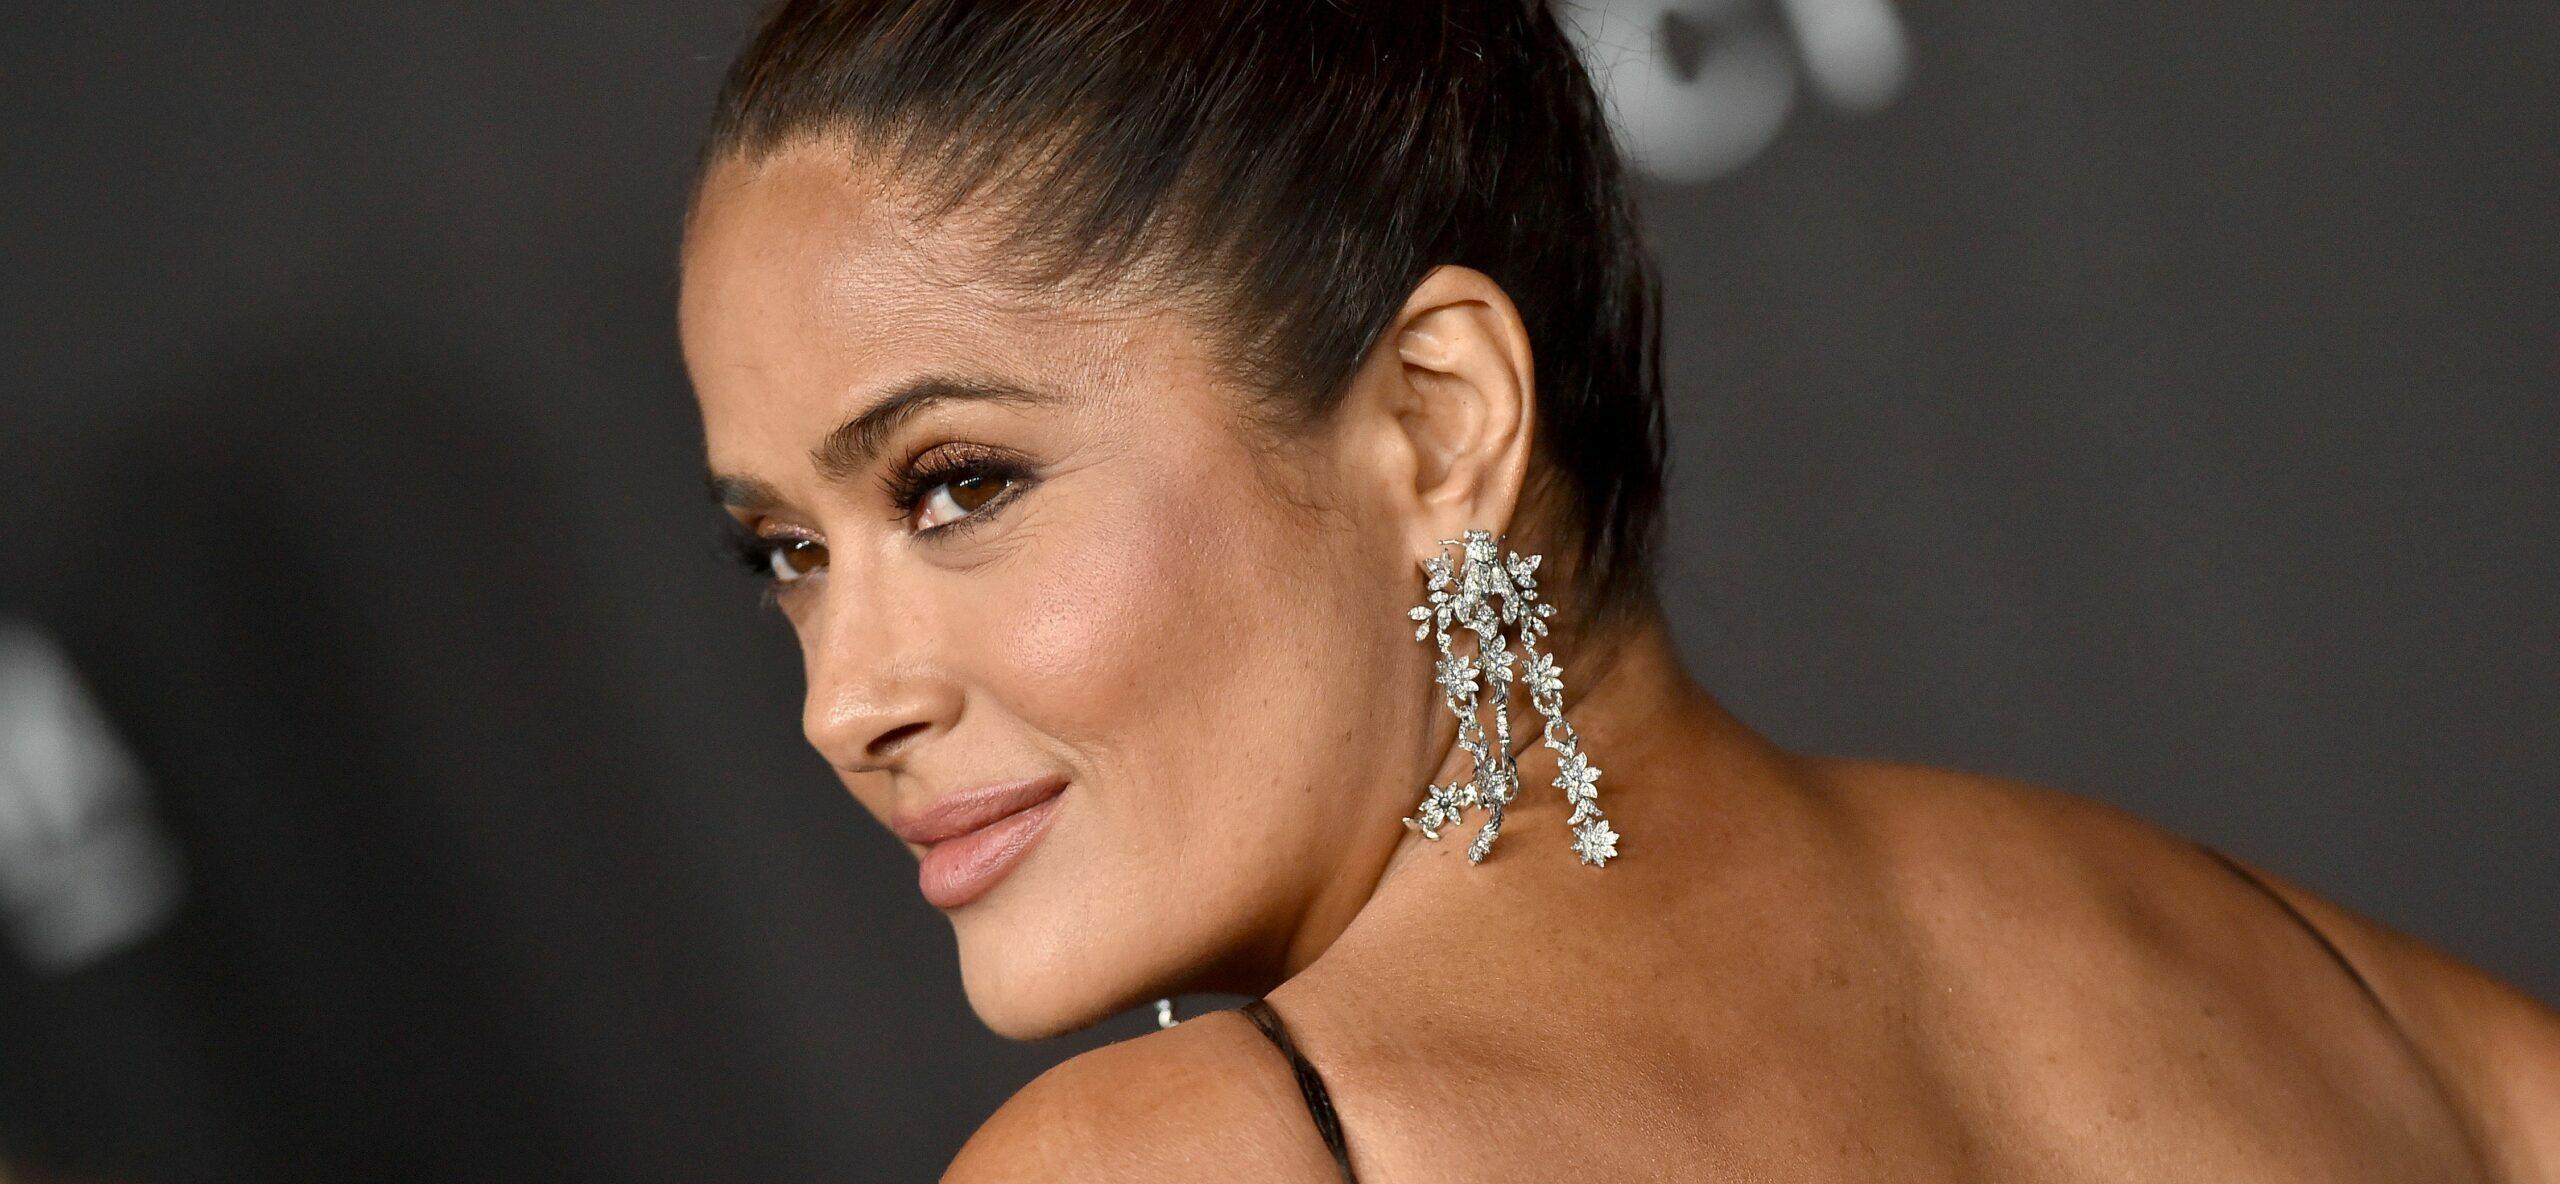 Salma Hayek Shares Ways To Make A Difference On World Oceans Day